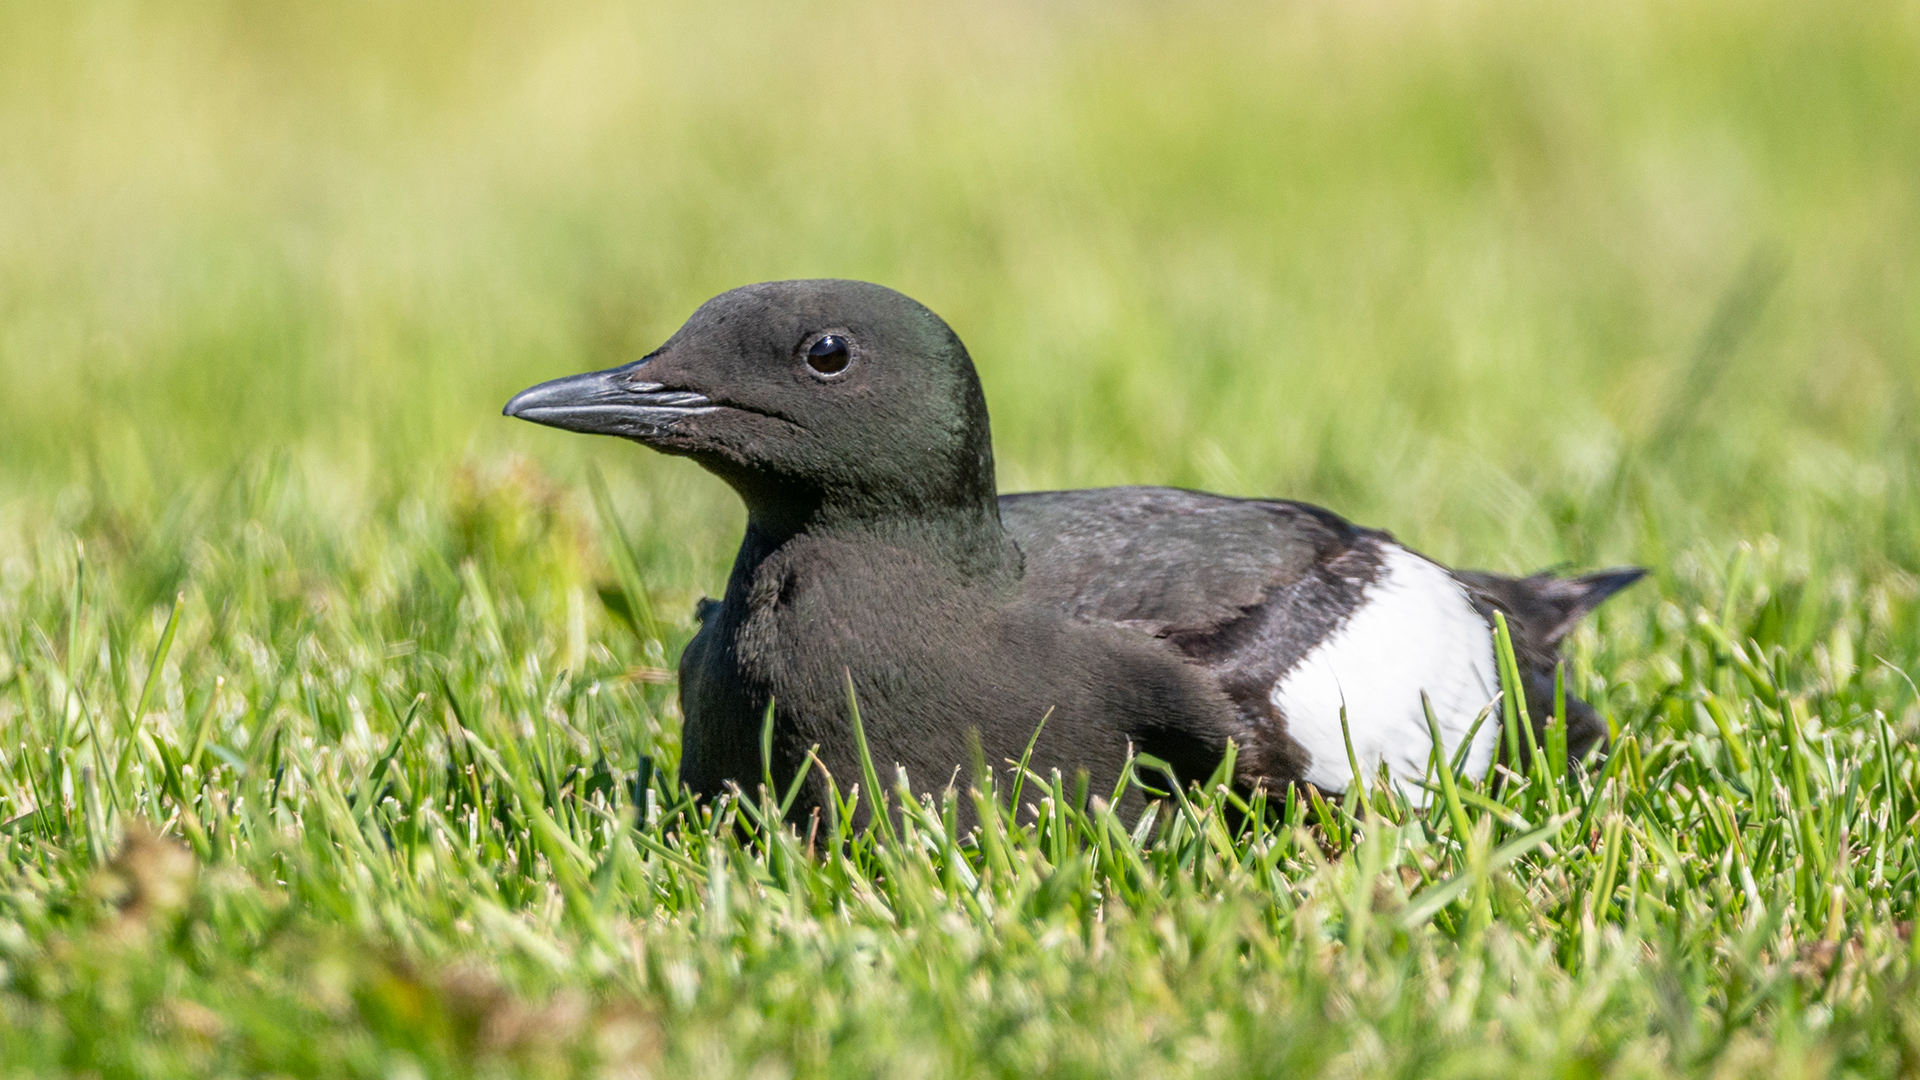 The front lawn by the restaurant serves as a tranquil resting spot. This black guillemot seemed undisturbed by our presence.